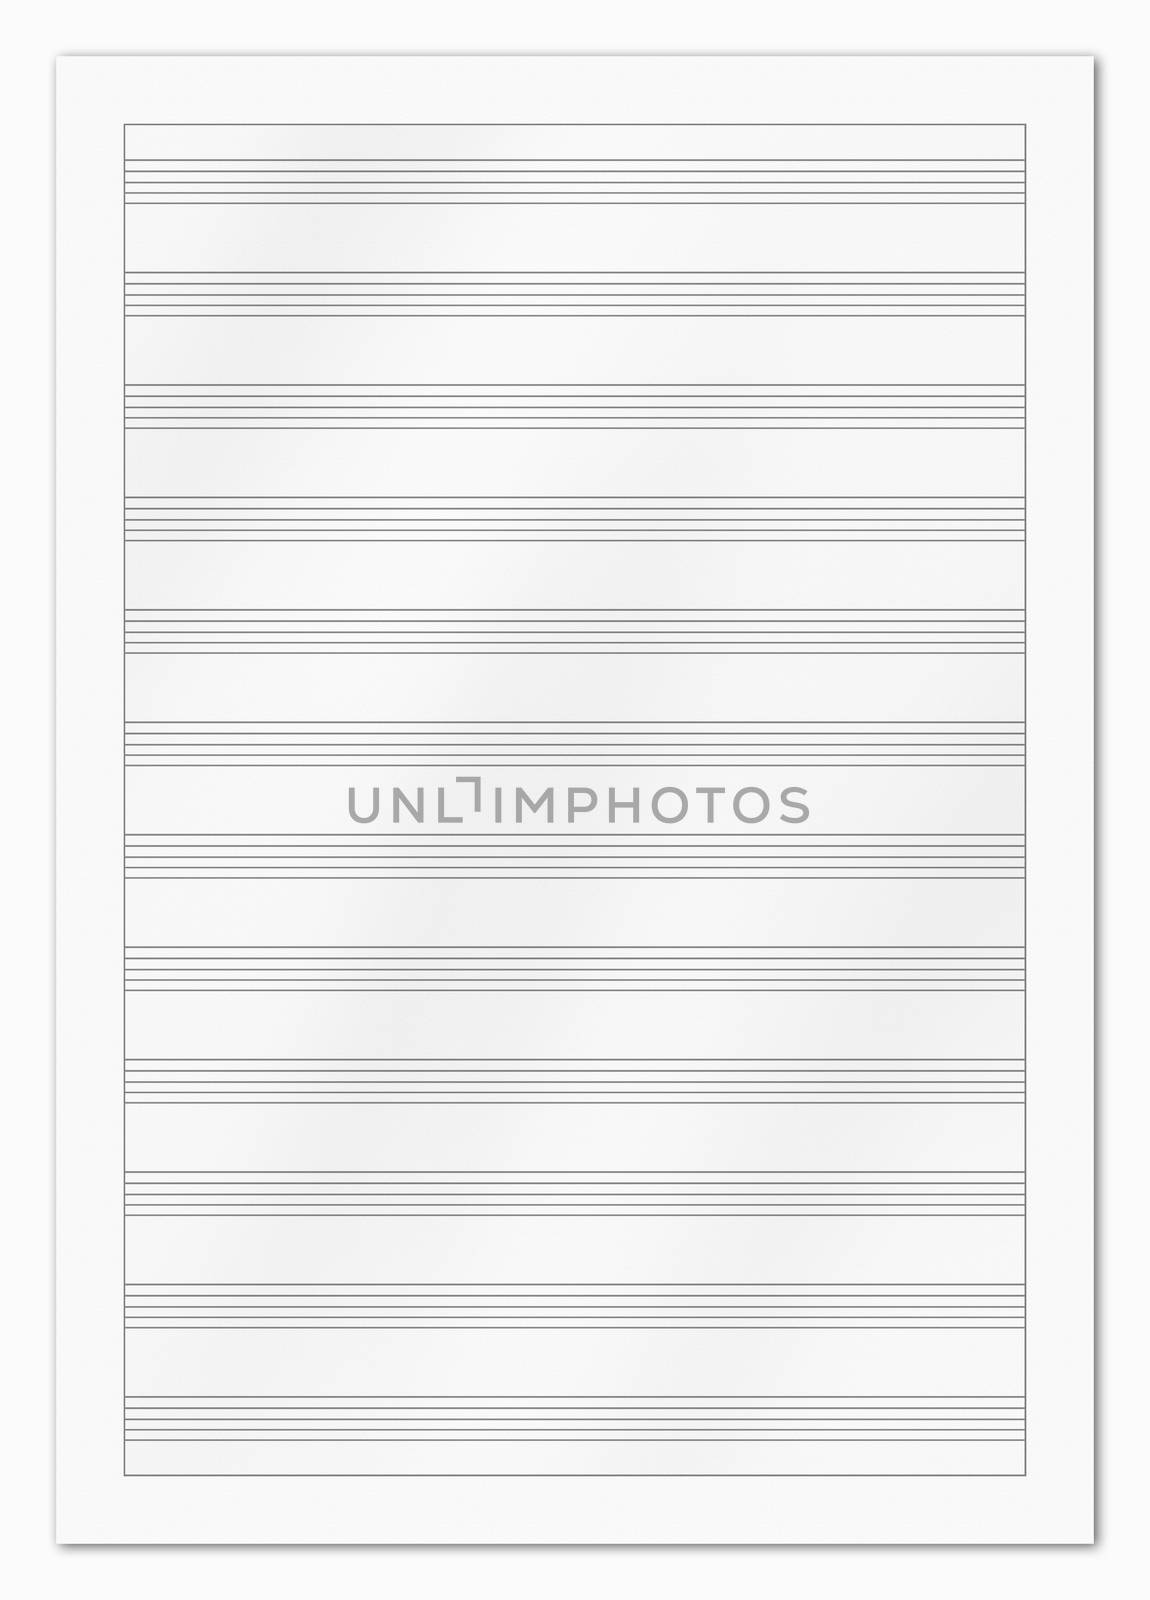 Blank music paper isolated on white